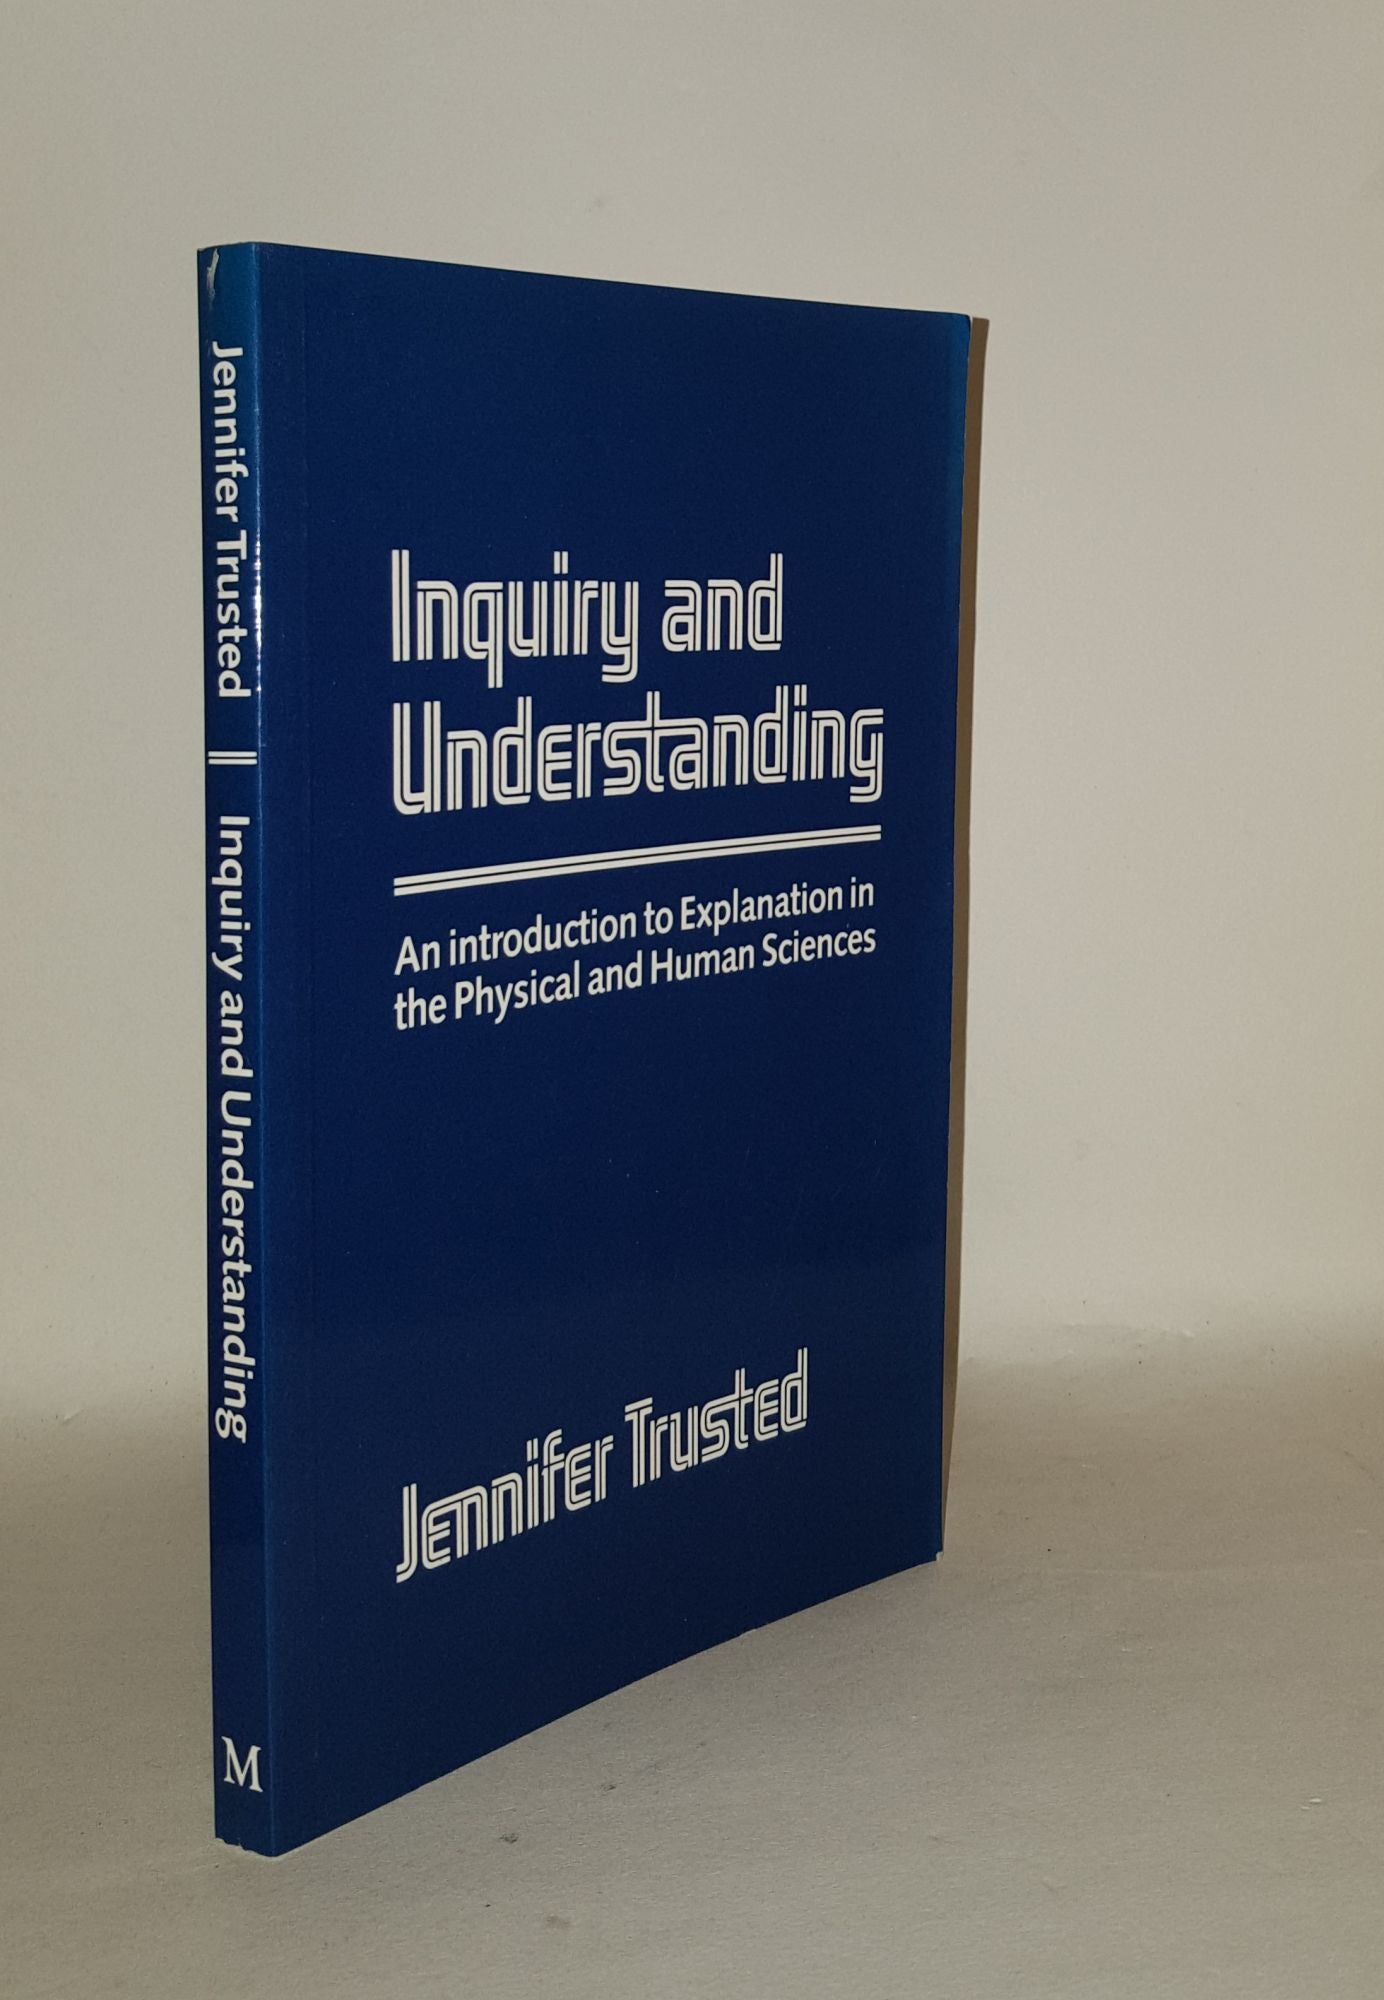 TRUSTED Jennifer - Inquiry and Understanding an Introduction to Explanation in the Physical and Human Sciences